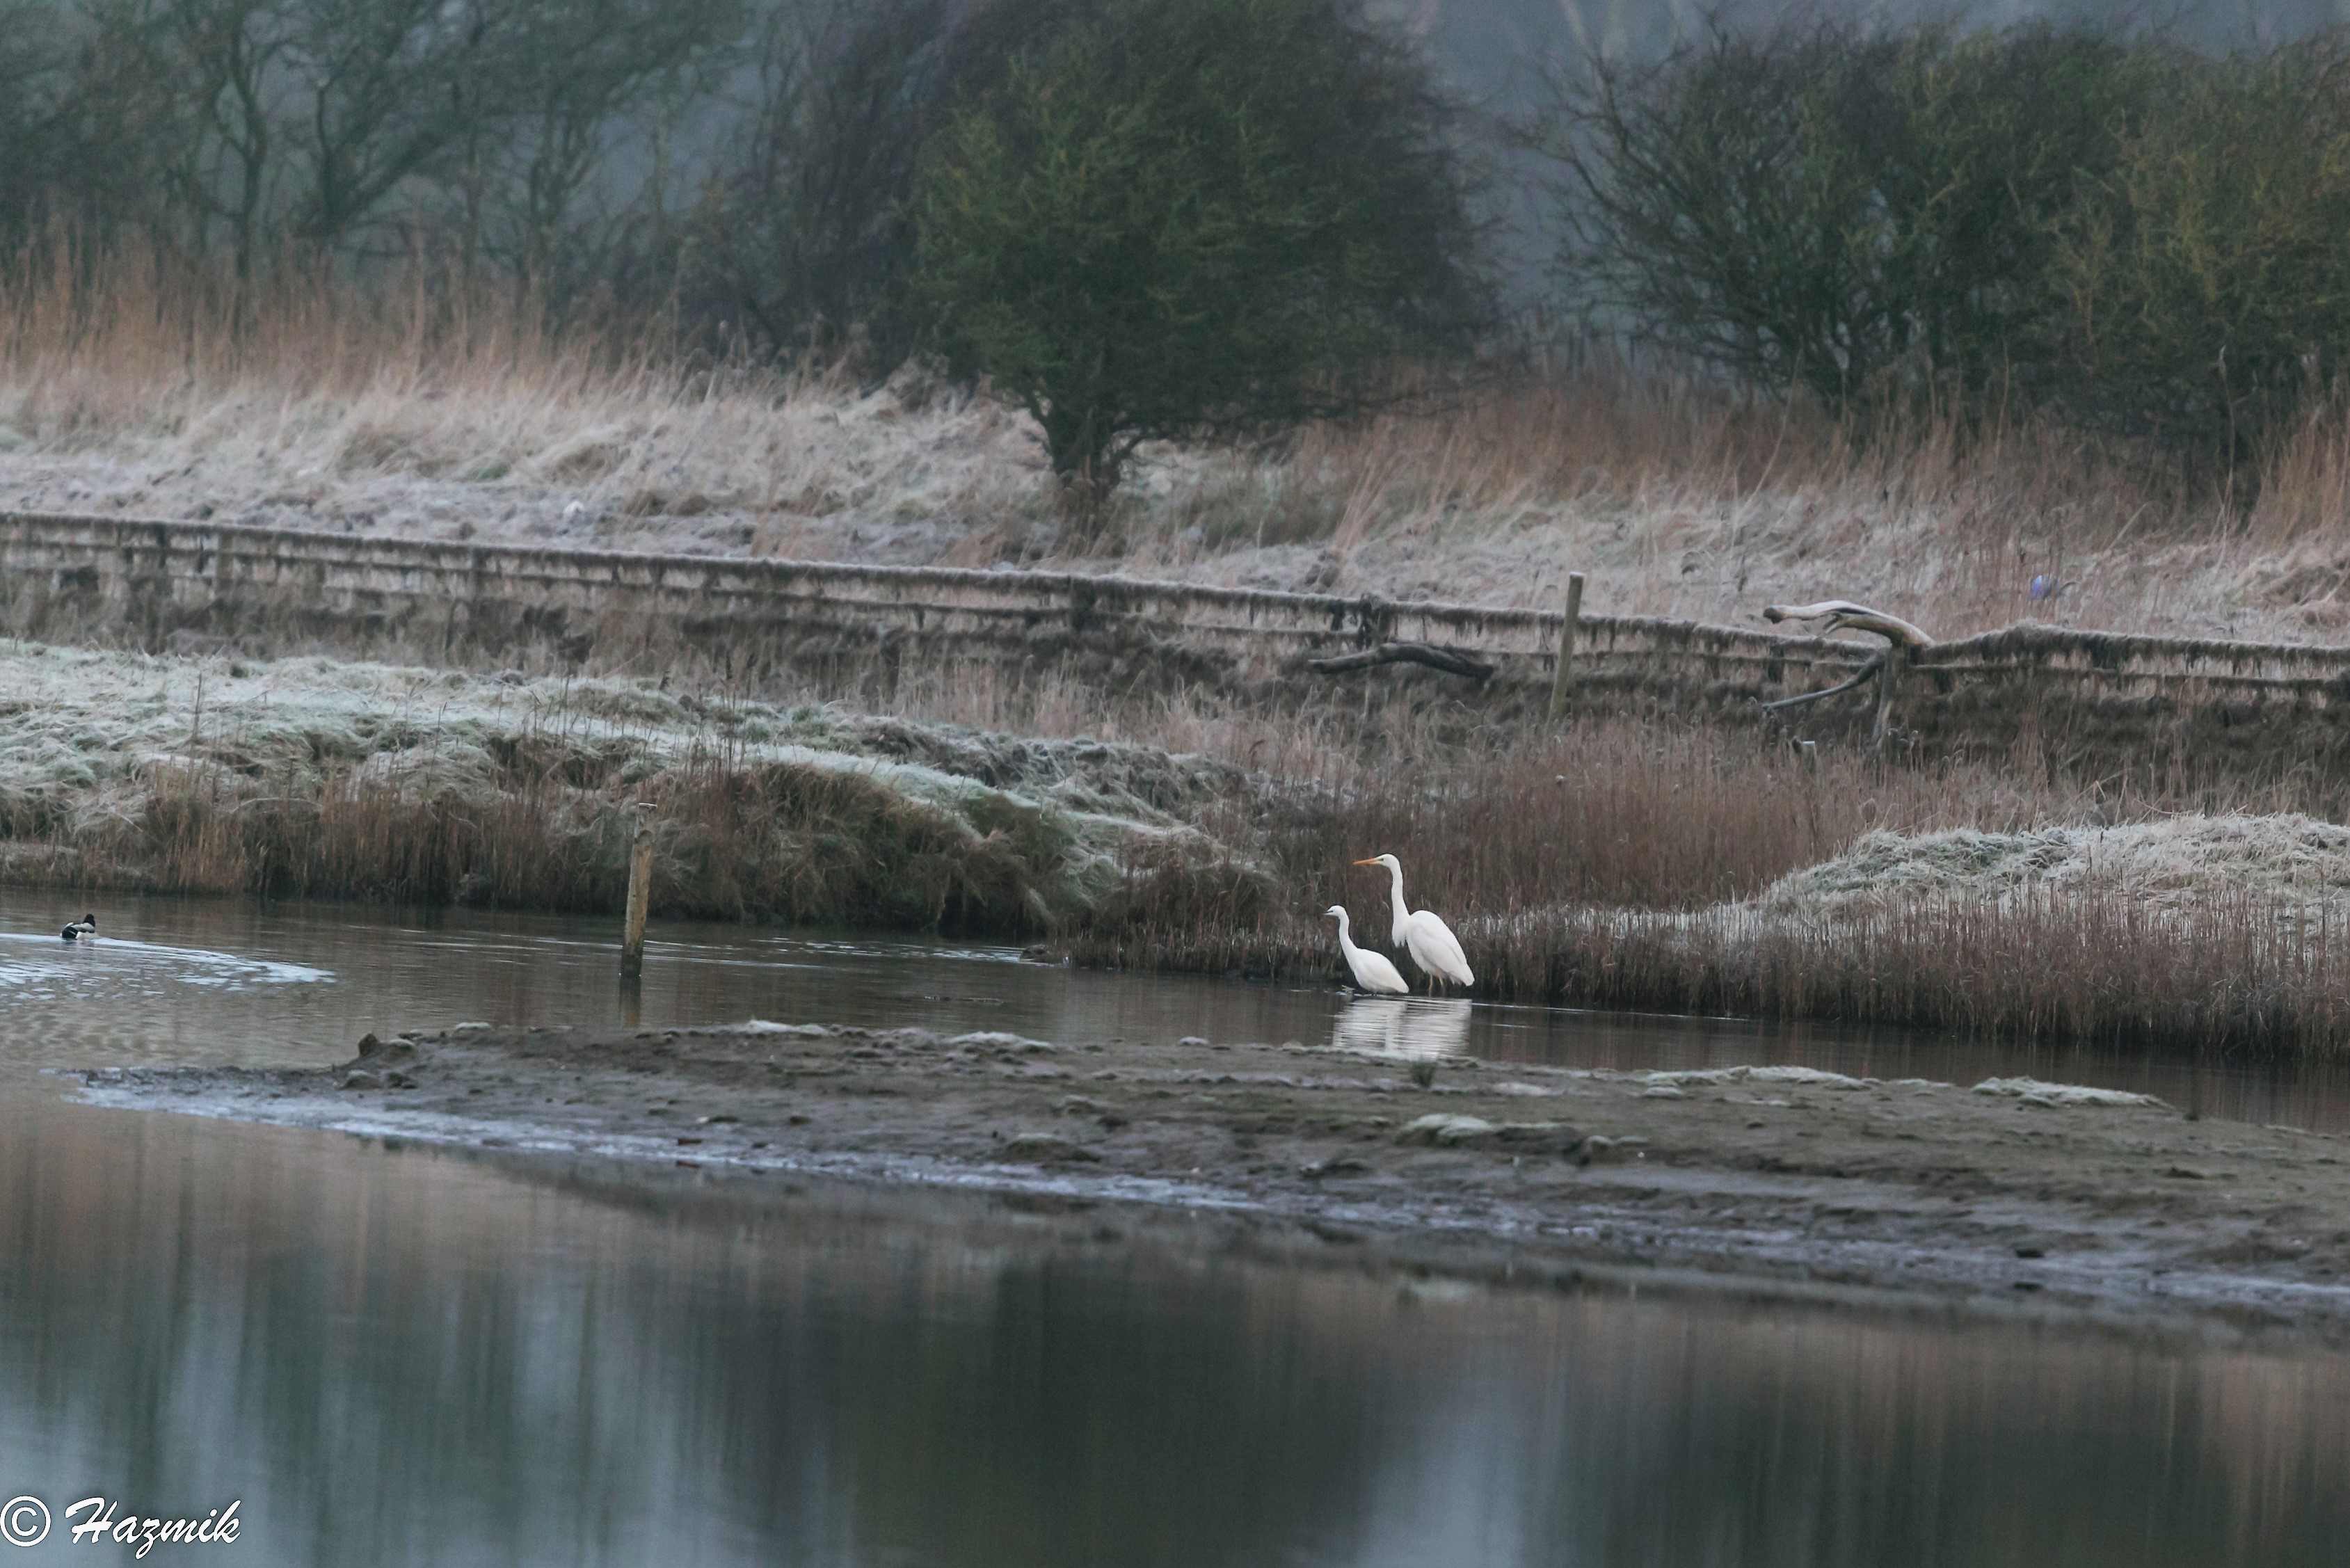 Leighton Moss - final day (salt marshes) - All creatures